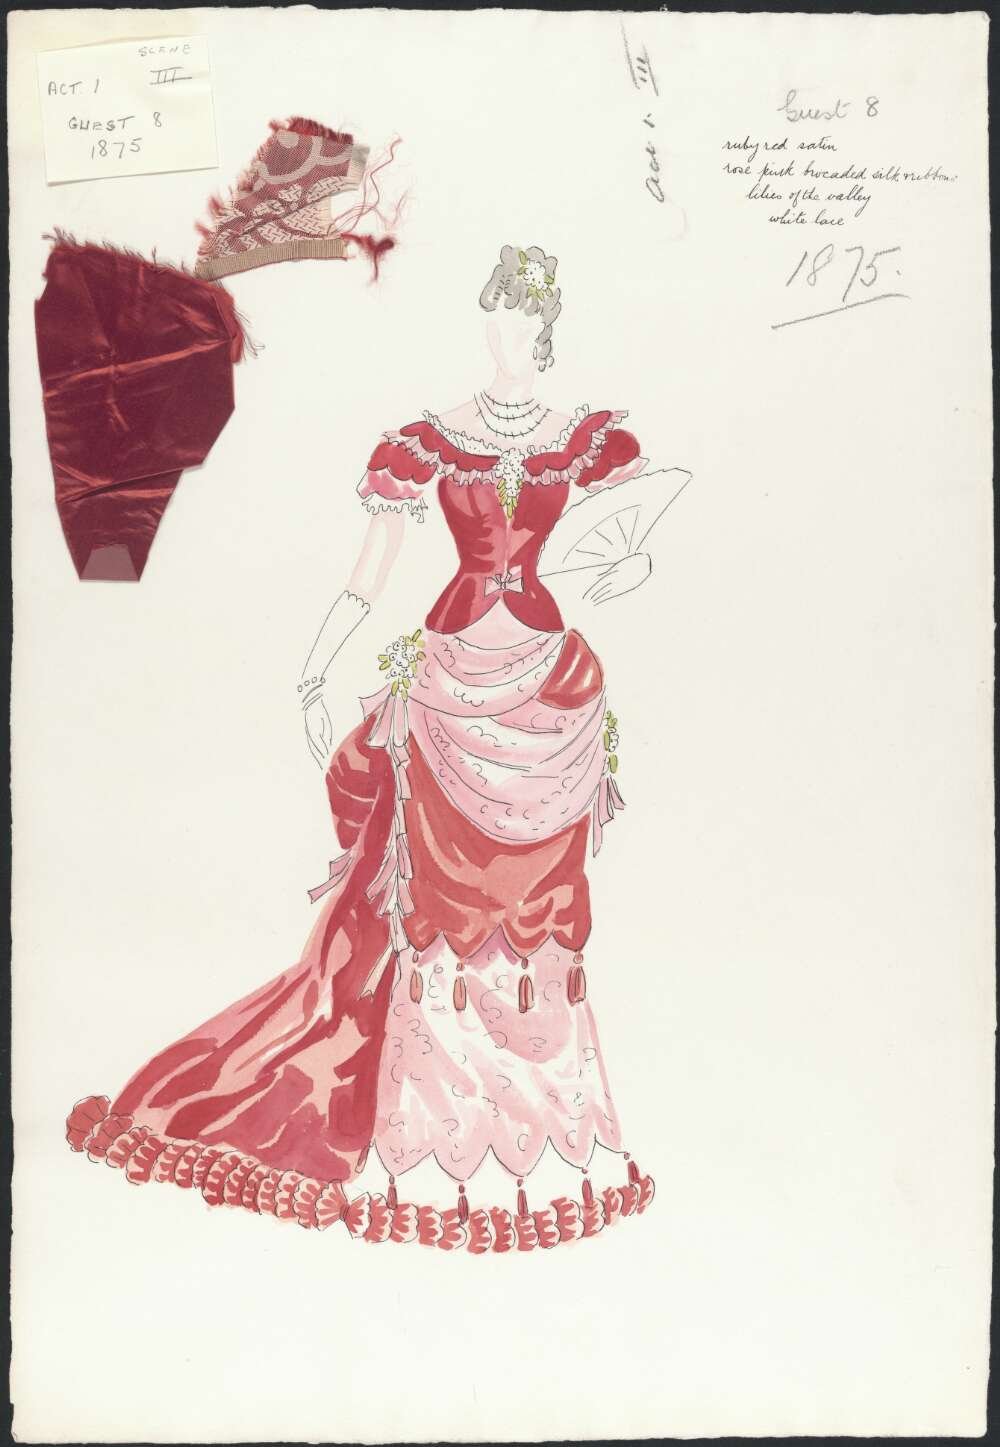 Costume design for Guest 8 from a J.C. Williamson production, 1875